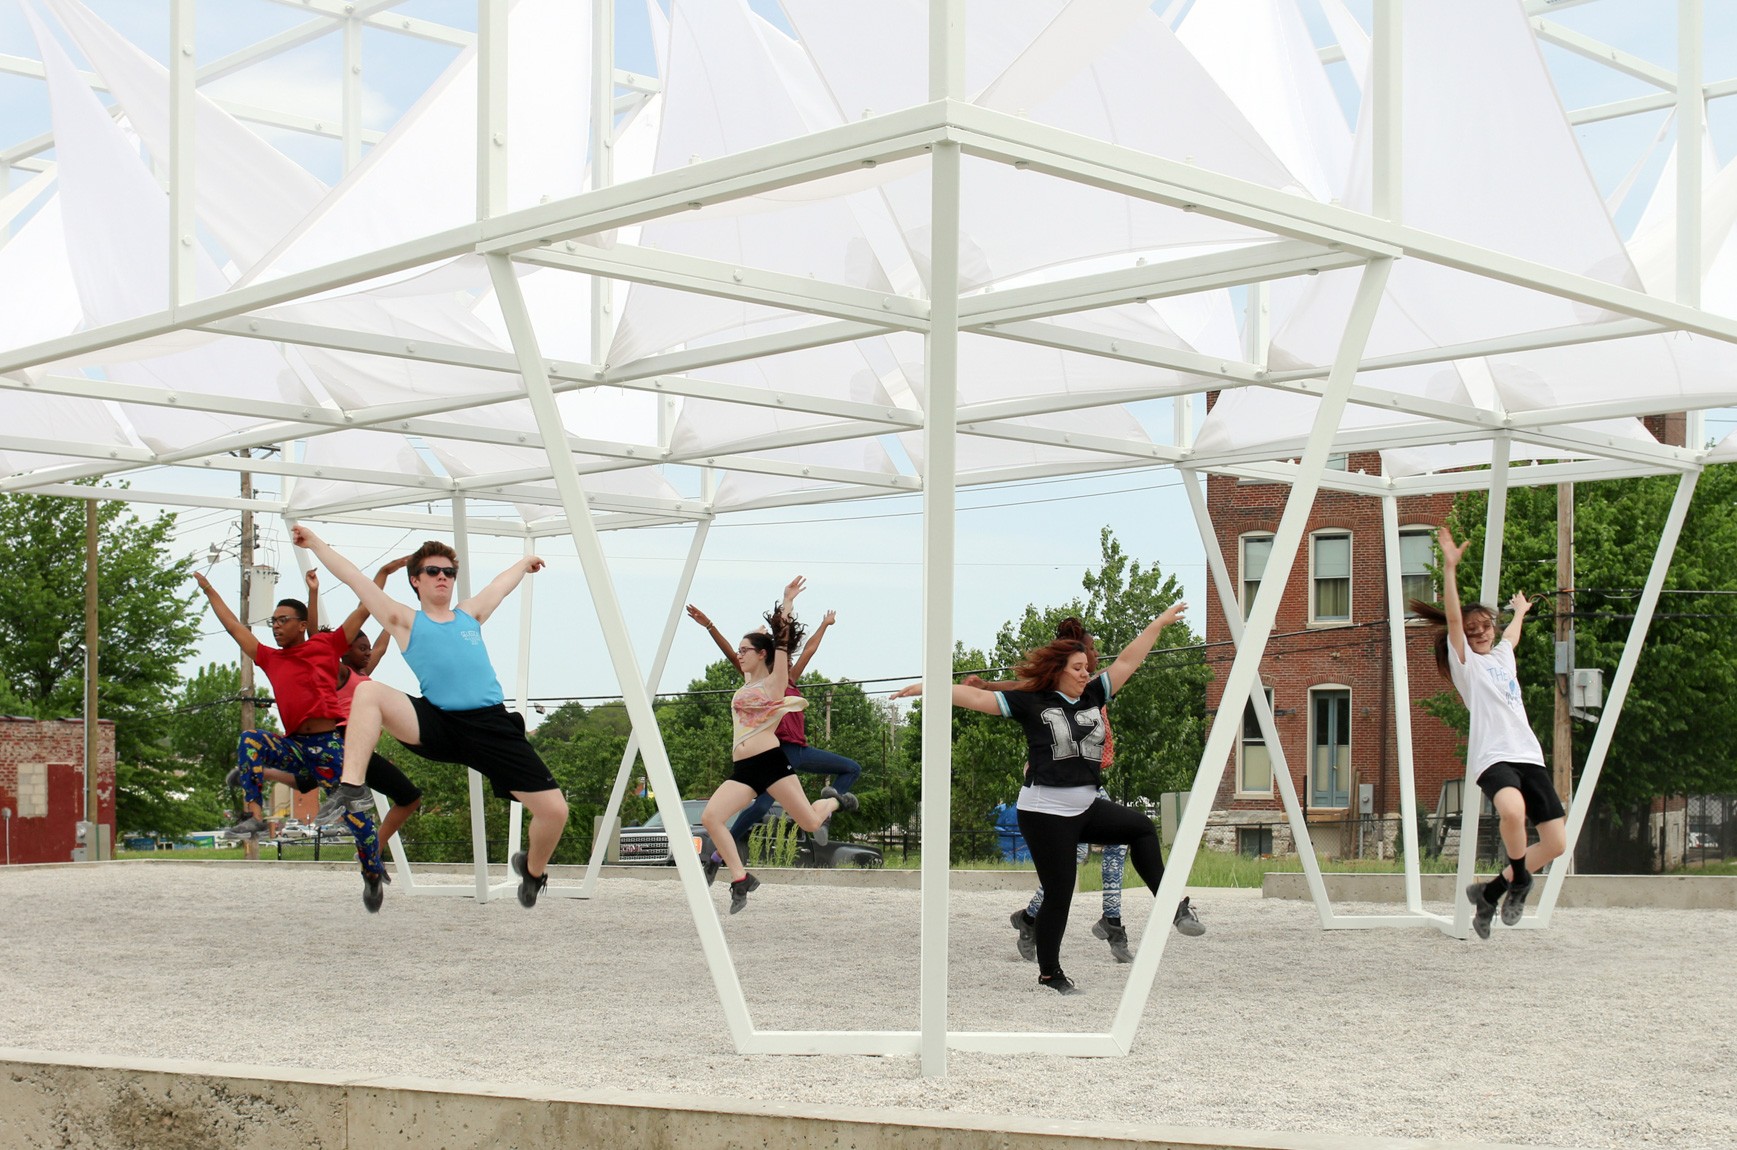 A group of dancers perform together beneath the Lots installation.